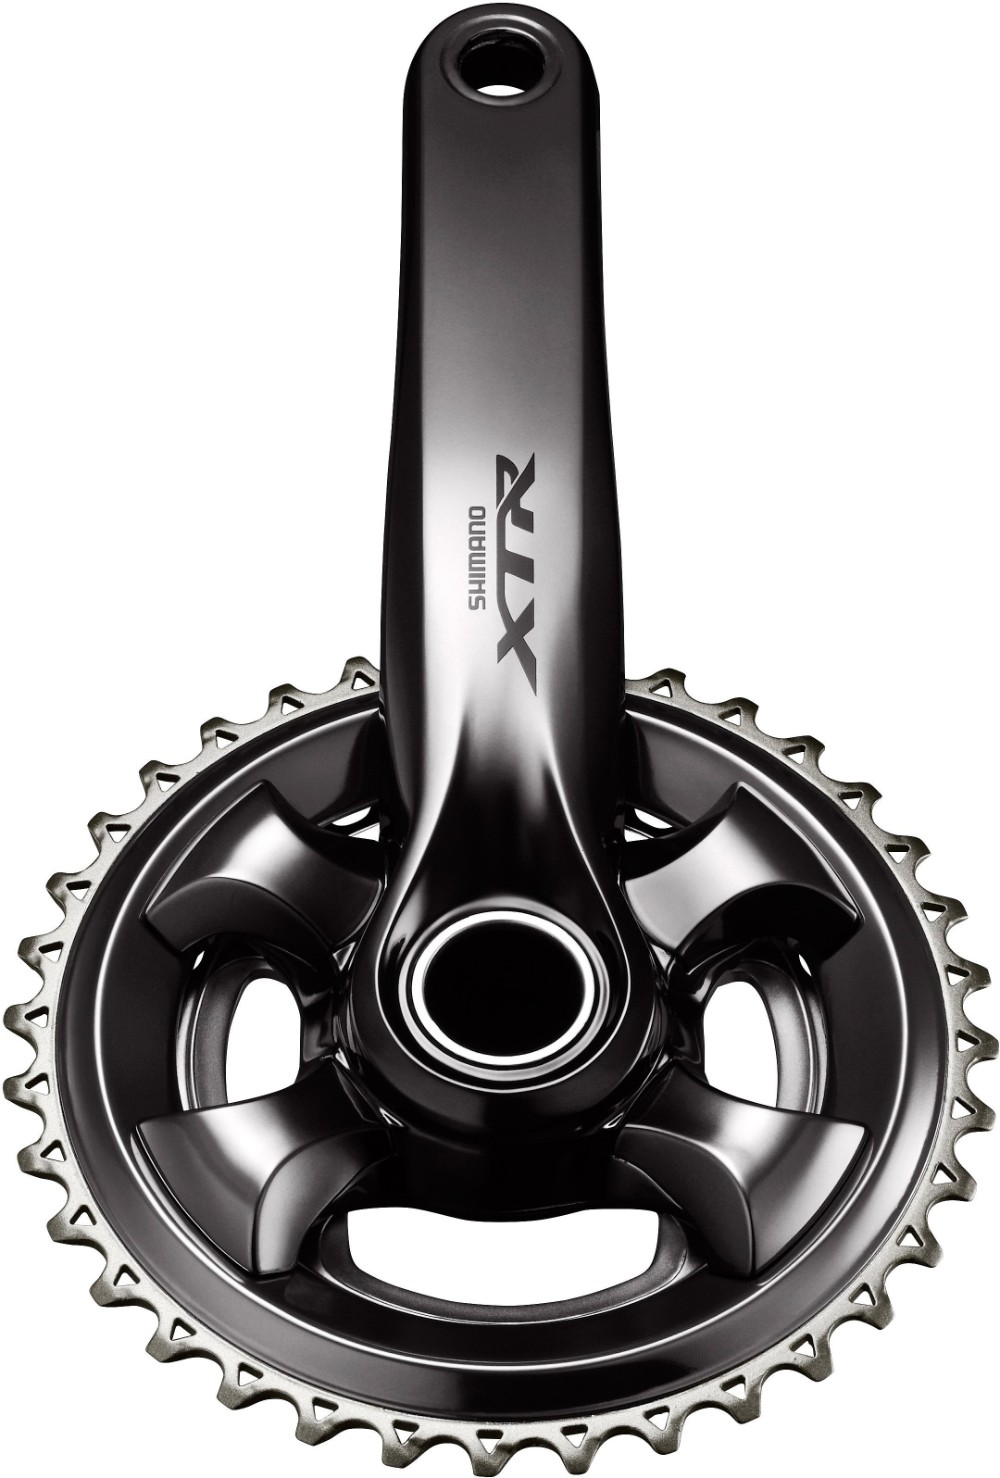 FC-M9020 XTR 11-Speed Chainset For 51.8mm Chain Line image 0